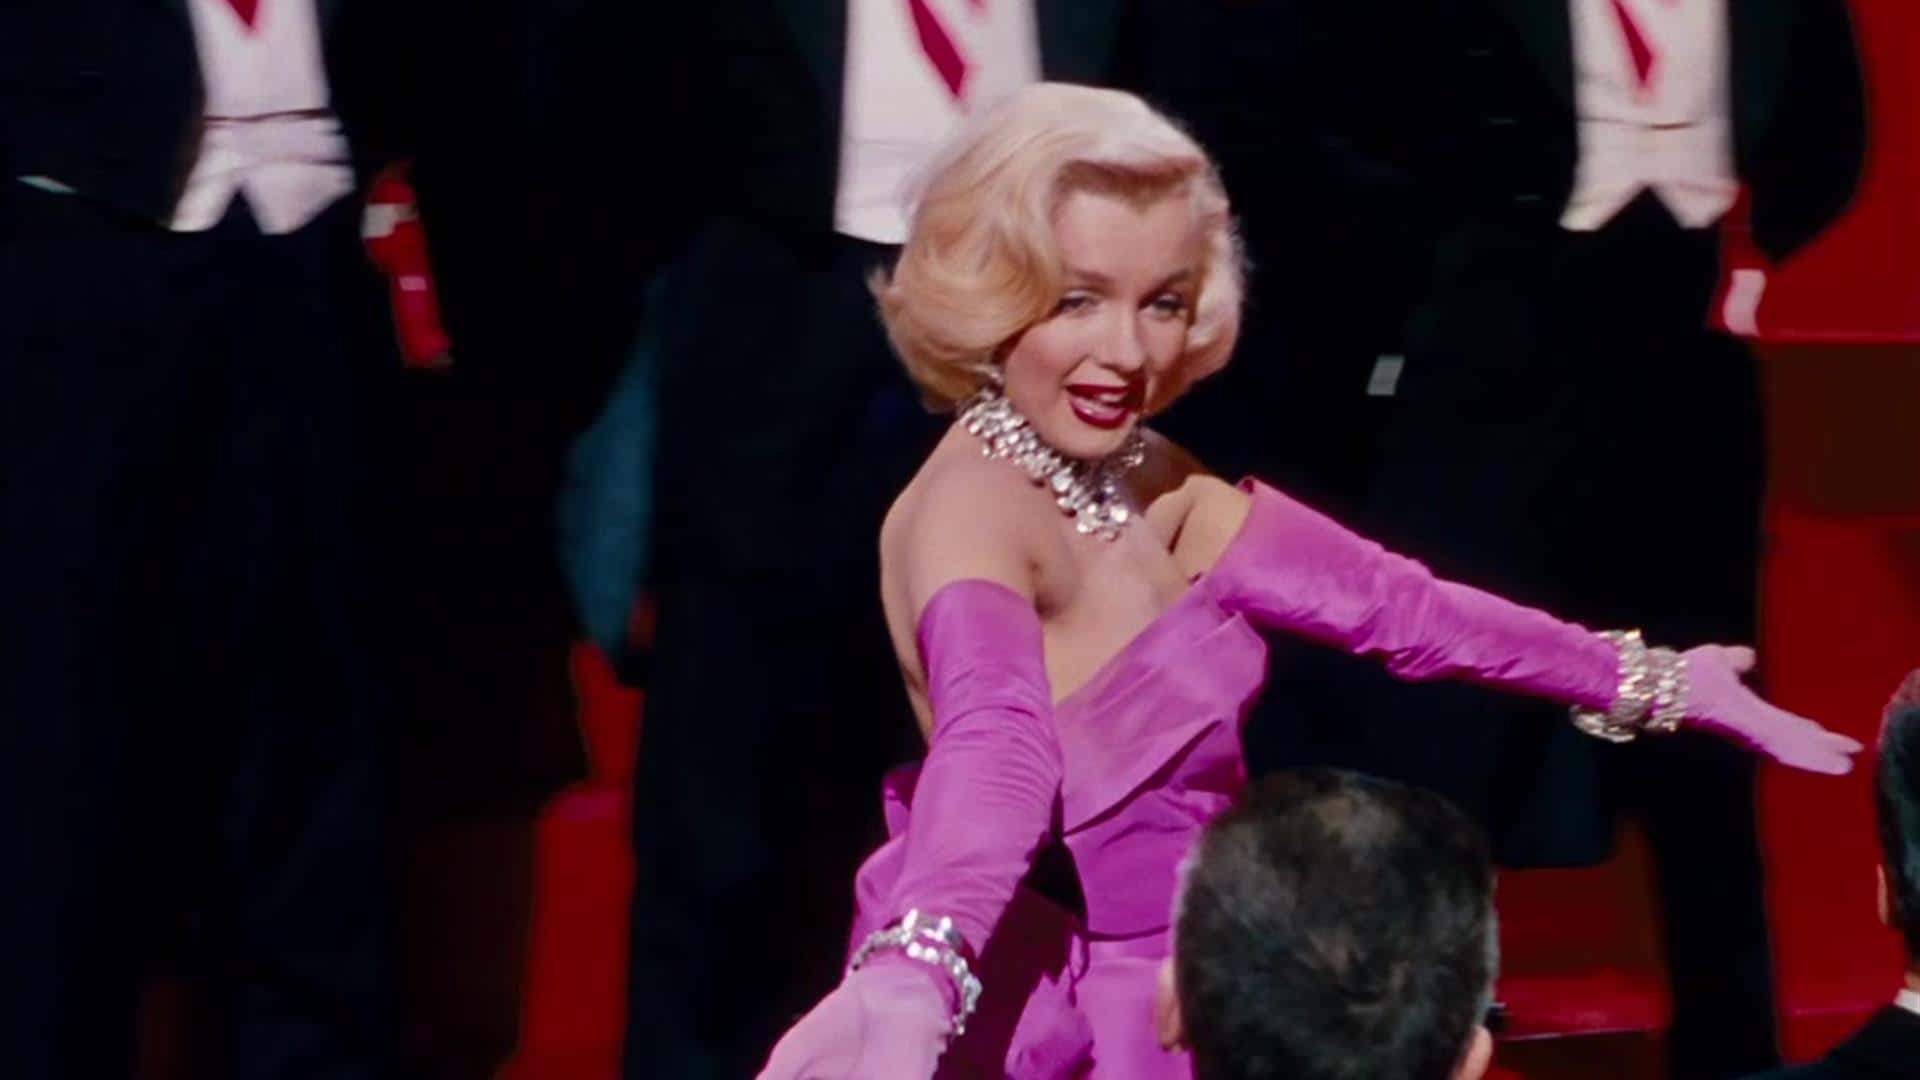 42 Classic Facts about Marilyn Monroe.